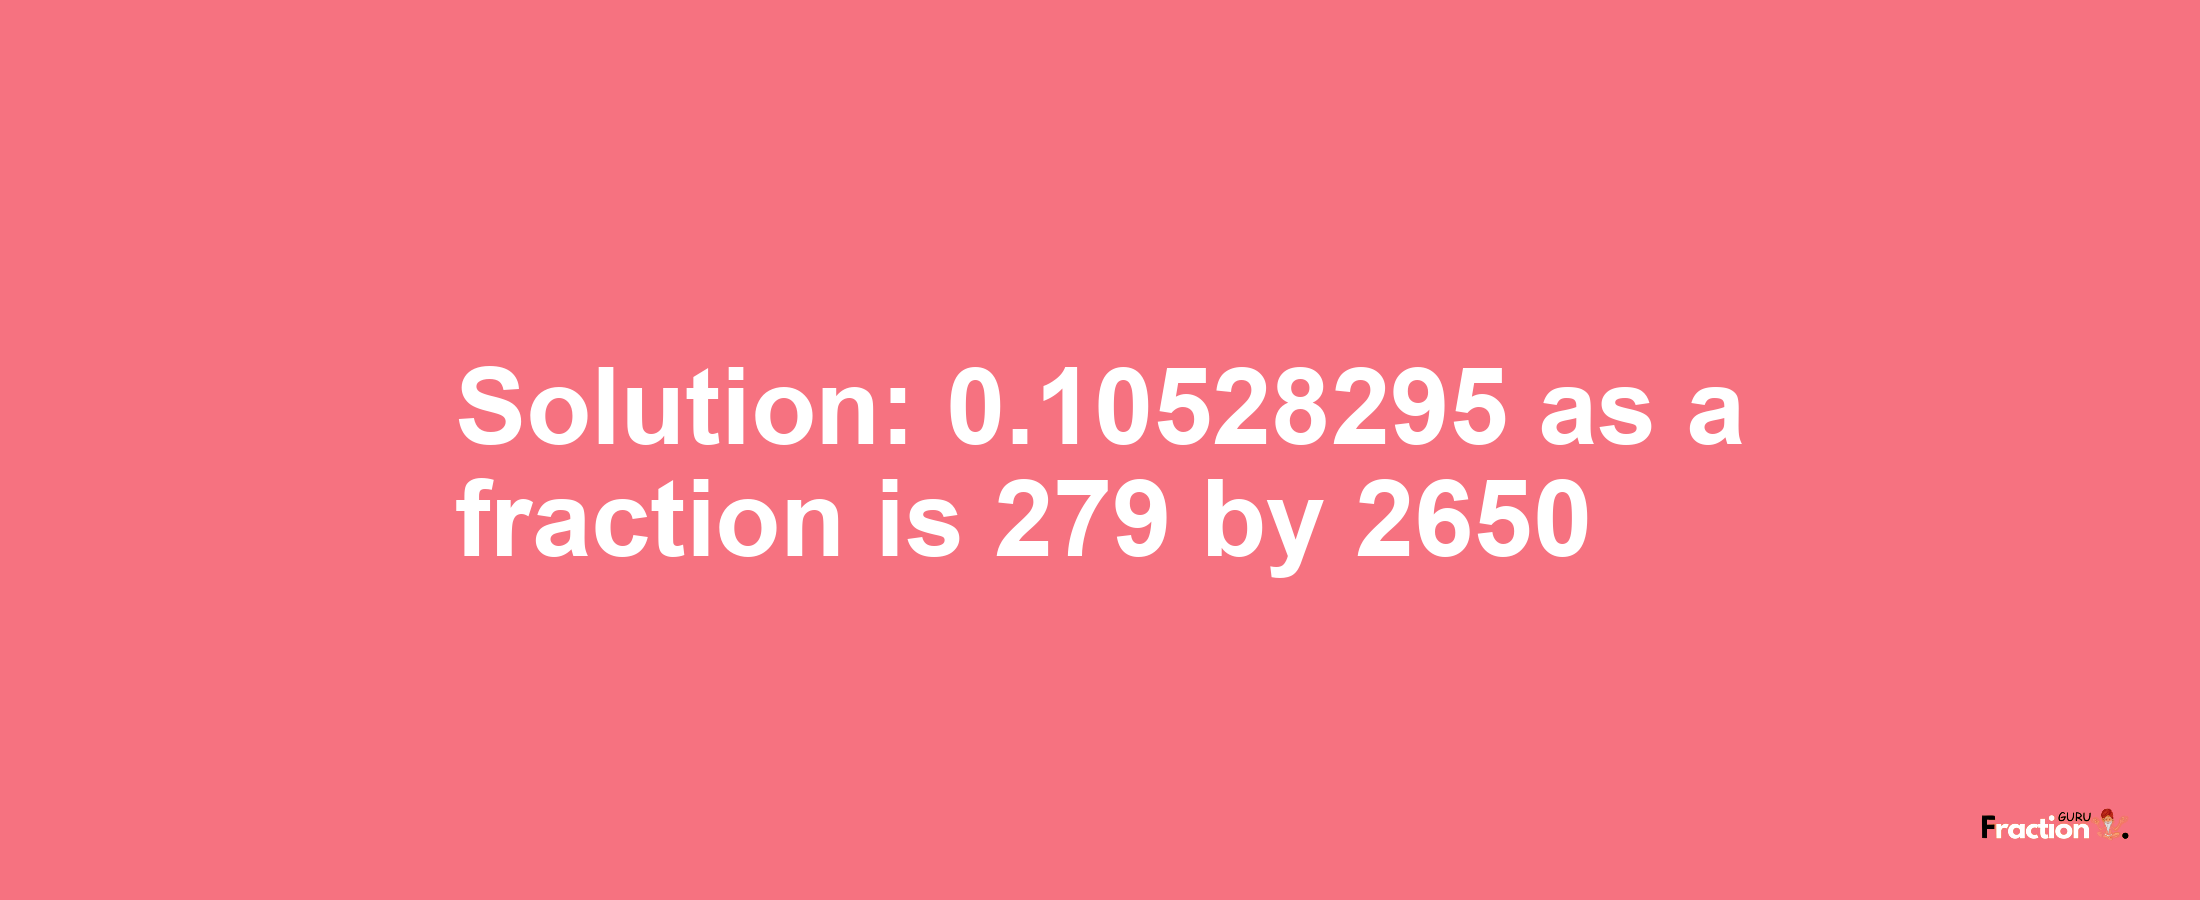 Solution:0.10528295 as a fraction is 279/2650